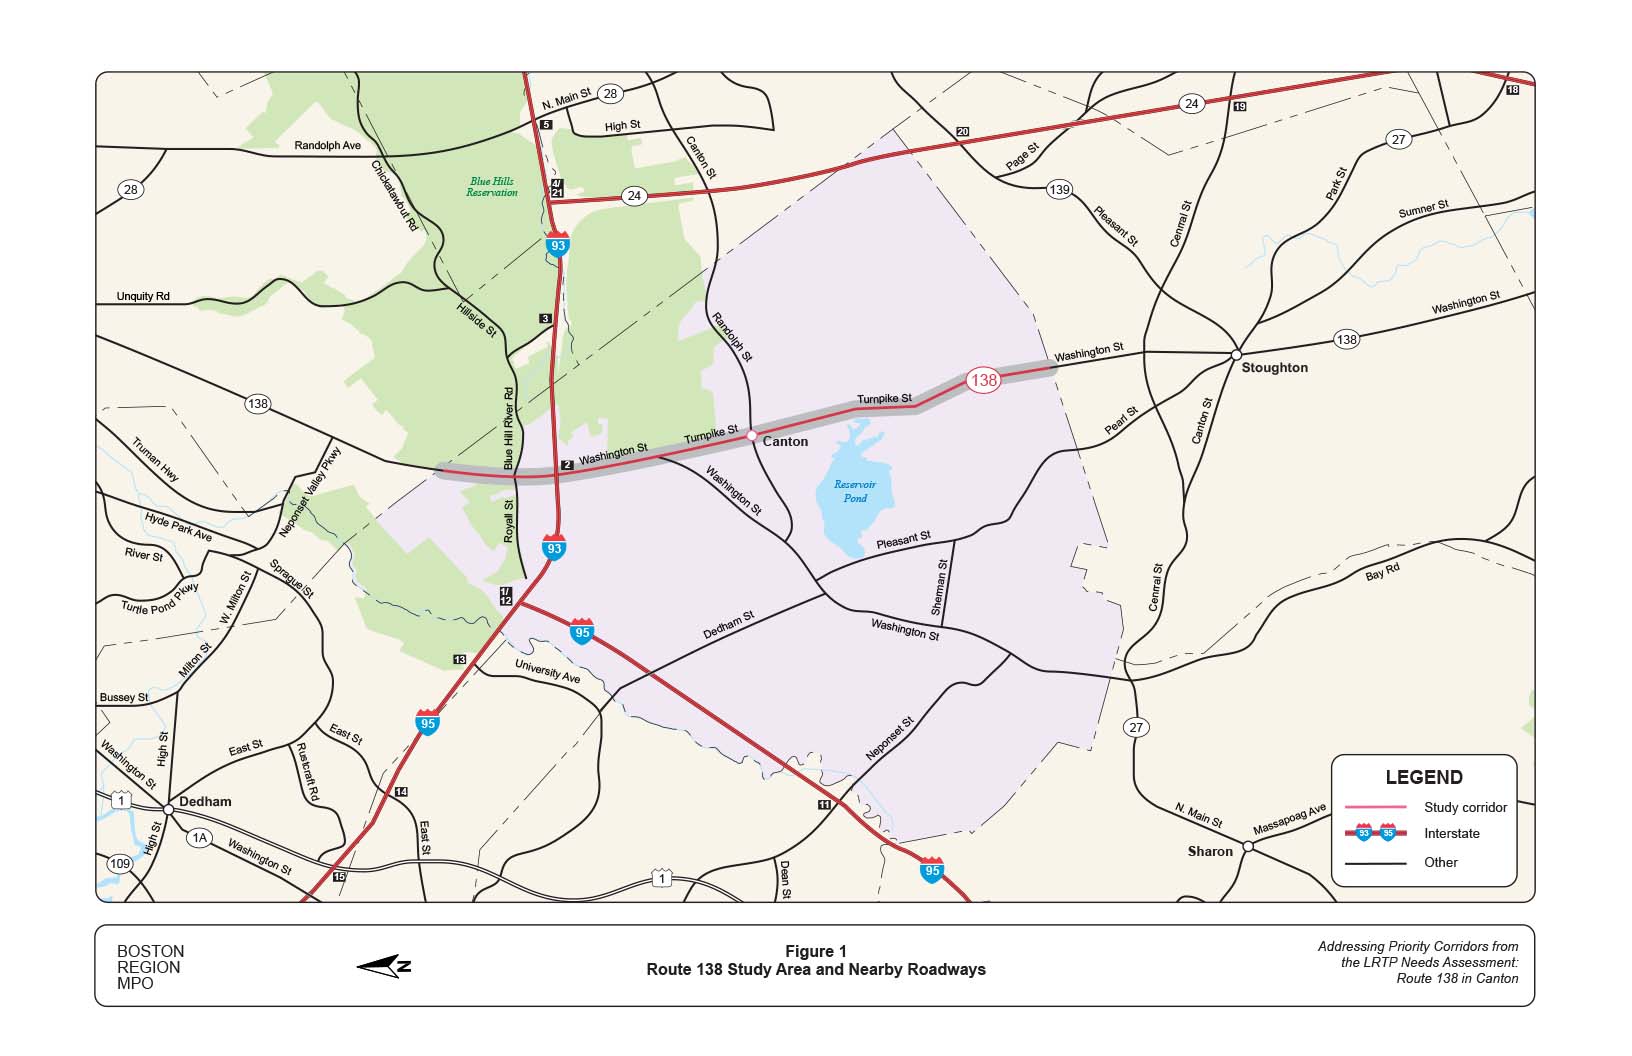 Figure 1 is a map of the study area, Route 138 in Canton and surrounding roadways